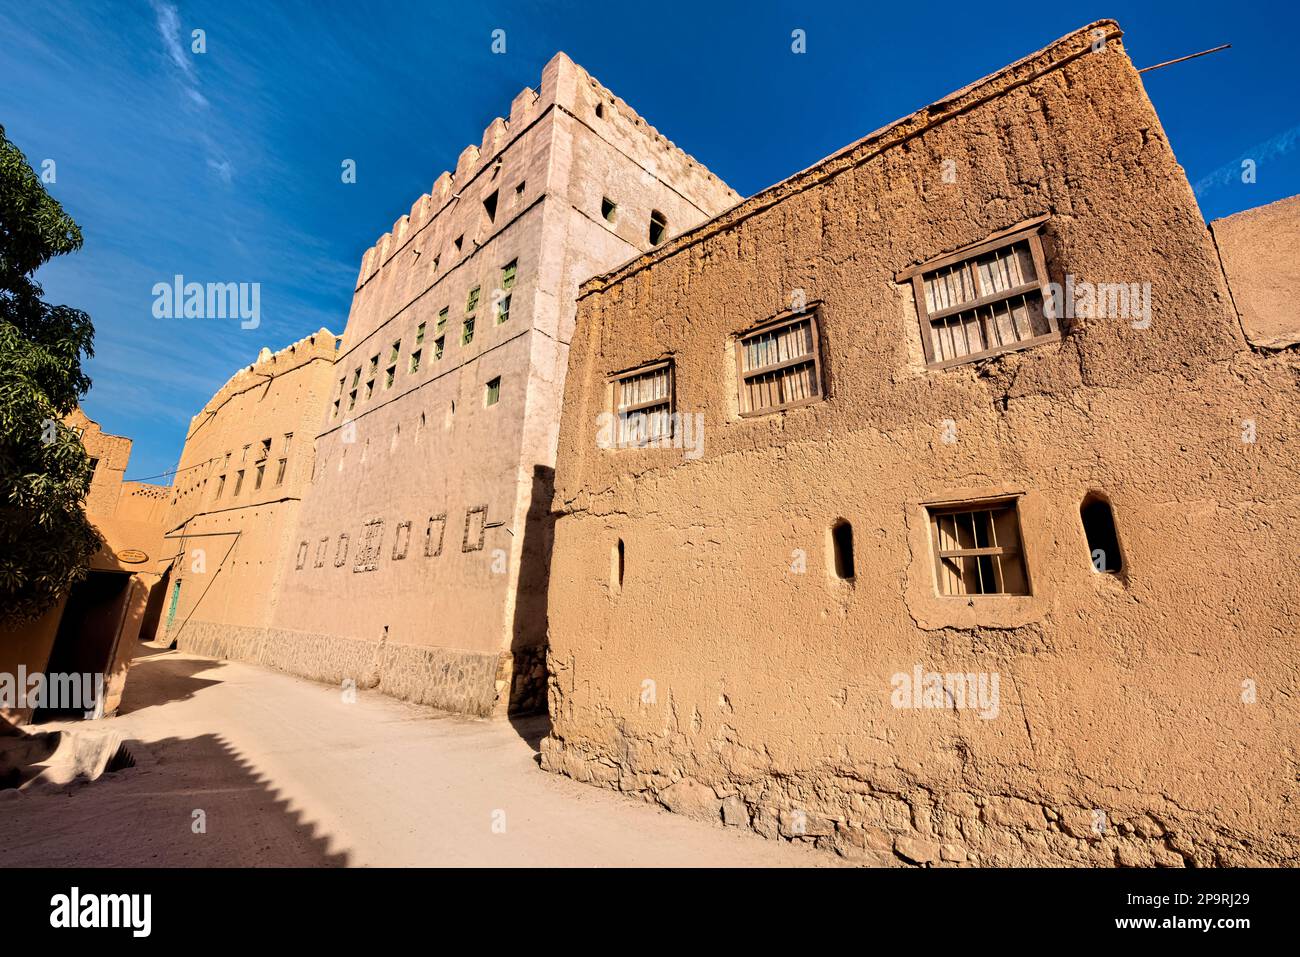 Traditional Bait al Safah old house and living museum amongst the ruins in Al Hamra, Oman Stock Photo